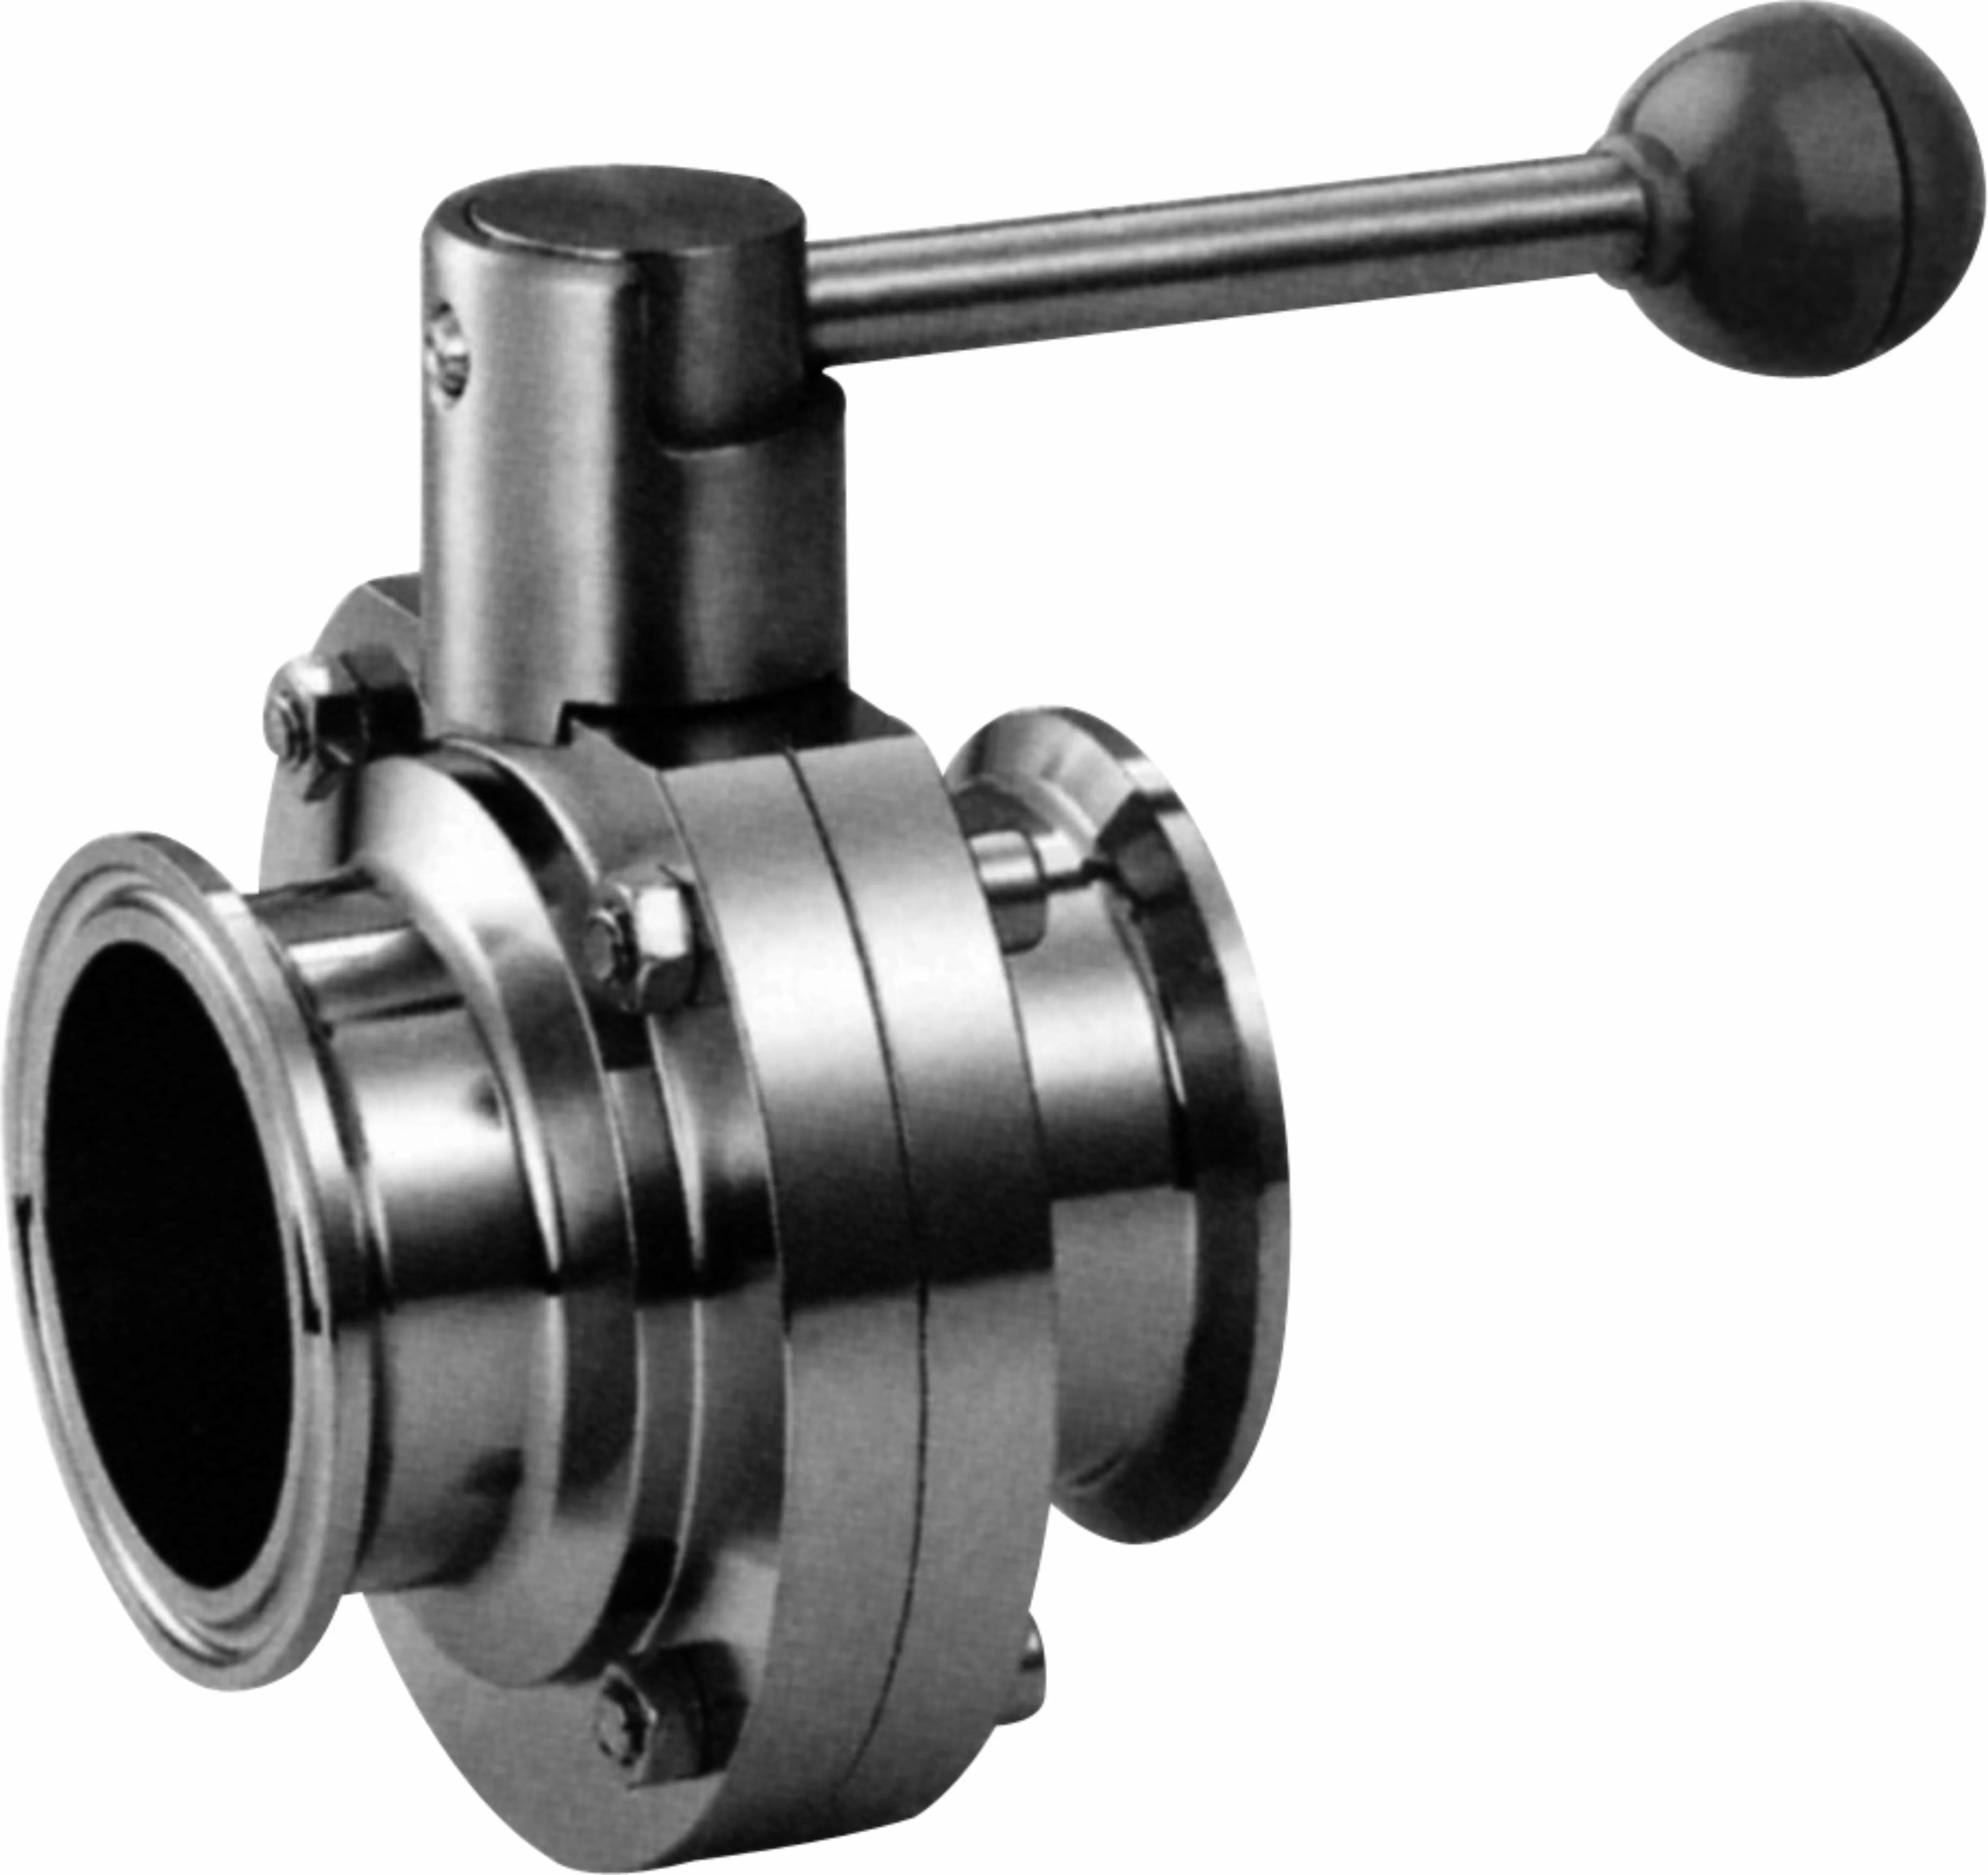 COVNA Stainless Steel 304 Tri Clamp Clover Sanitary Butterfly Valve with Pull Handle